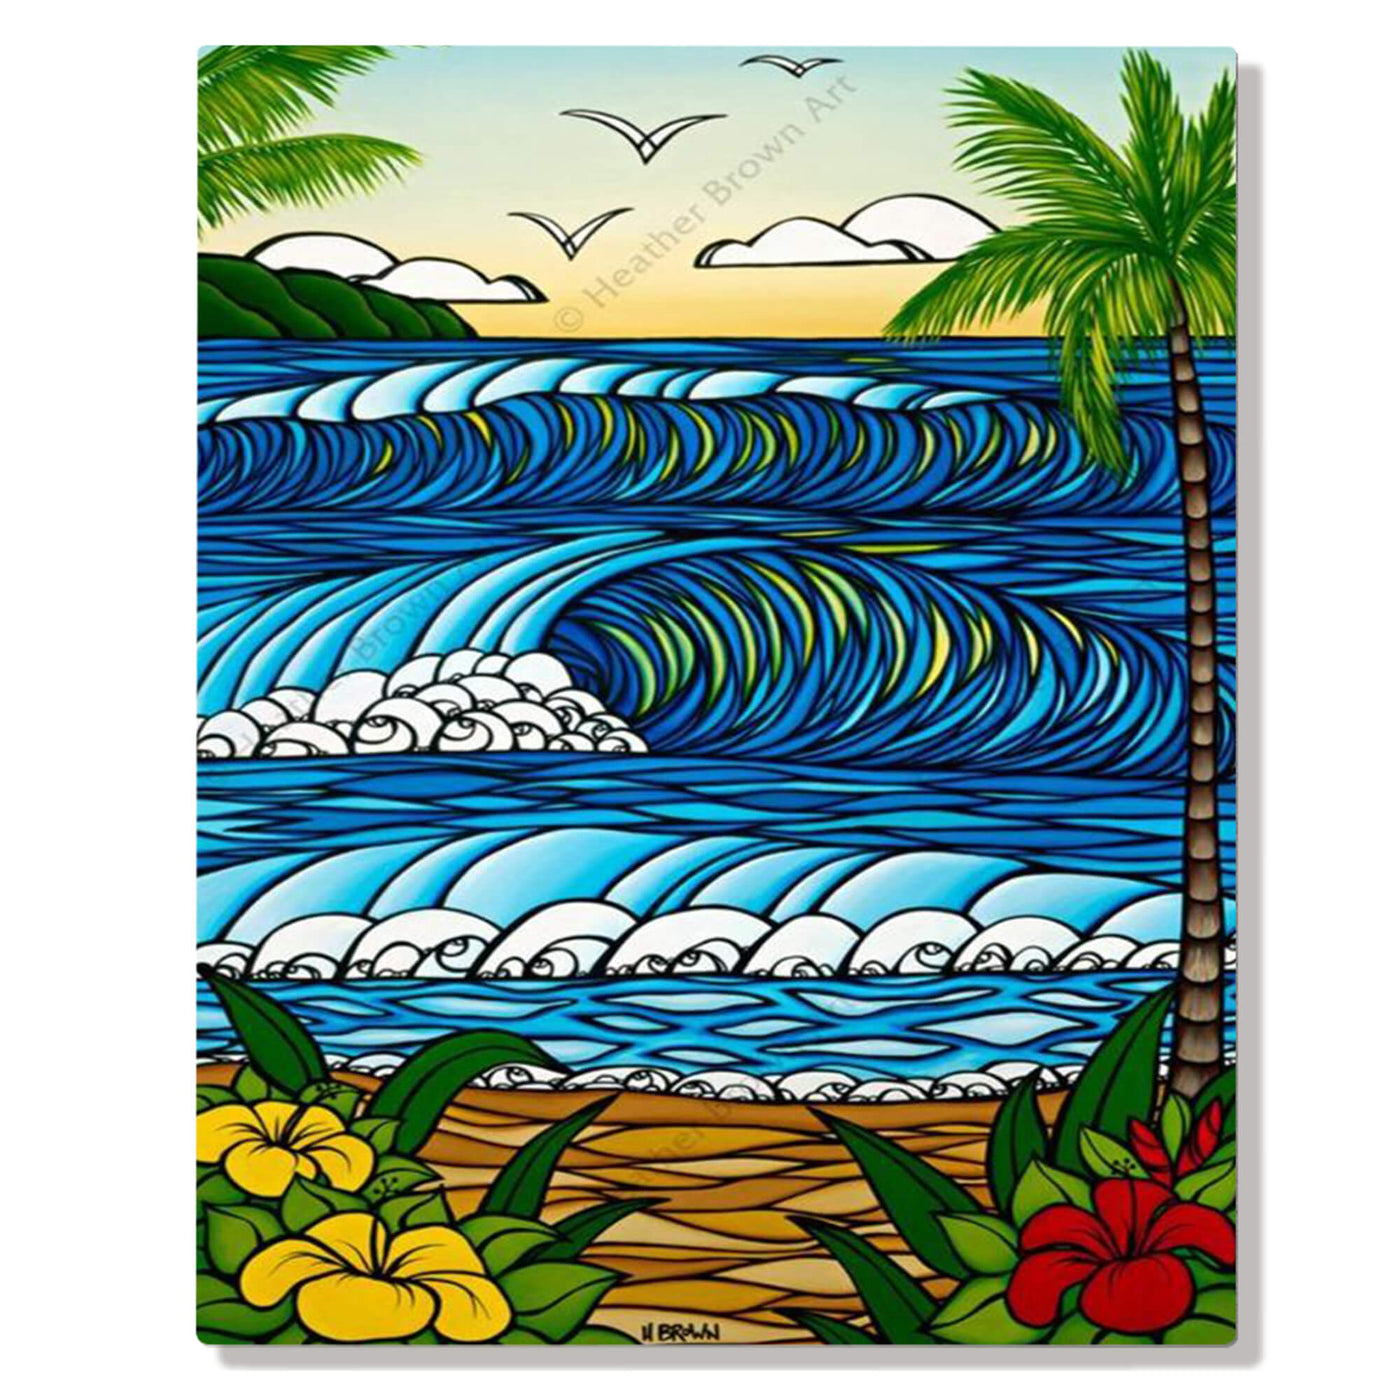 A metal art print featuring a classic view of a Hawaiian beach with hibiscus flowers, palm trees and rolling waves by Hawaii surf artist Heather Brown